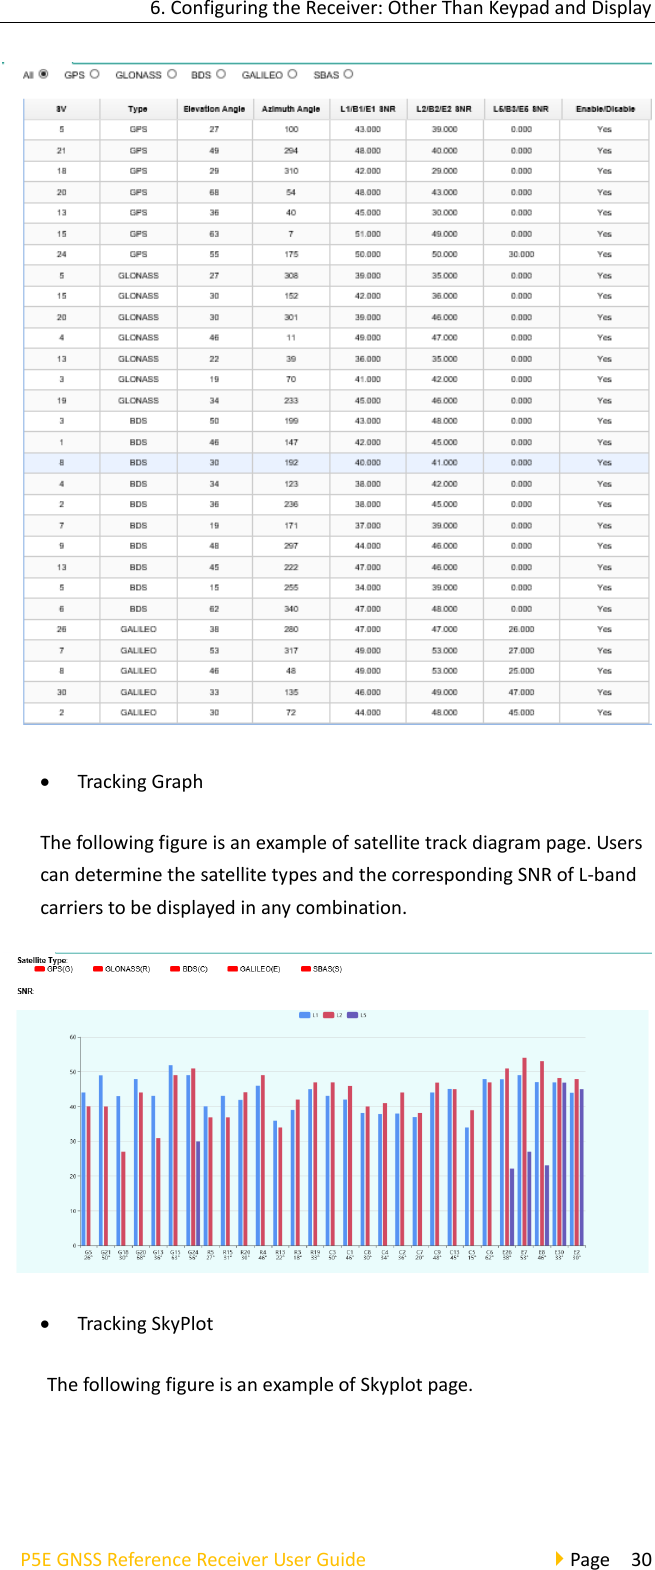 6. Configuring the Receiver: Other Than Keypad and Display P5E GNSS Reference Receiver User Guide                                     Page  30  • Tracking Graph The following figure is an example of satellite track diagram page. Users can determine the satellite types and the corresponding SNR of L-band carriers to be displayed in any combination.    • Tracking SkyPlot The following figure is an example of Skyplot page. 